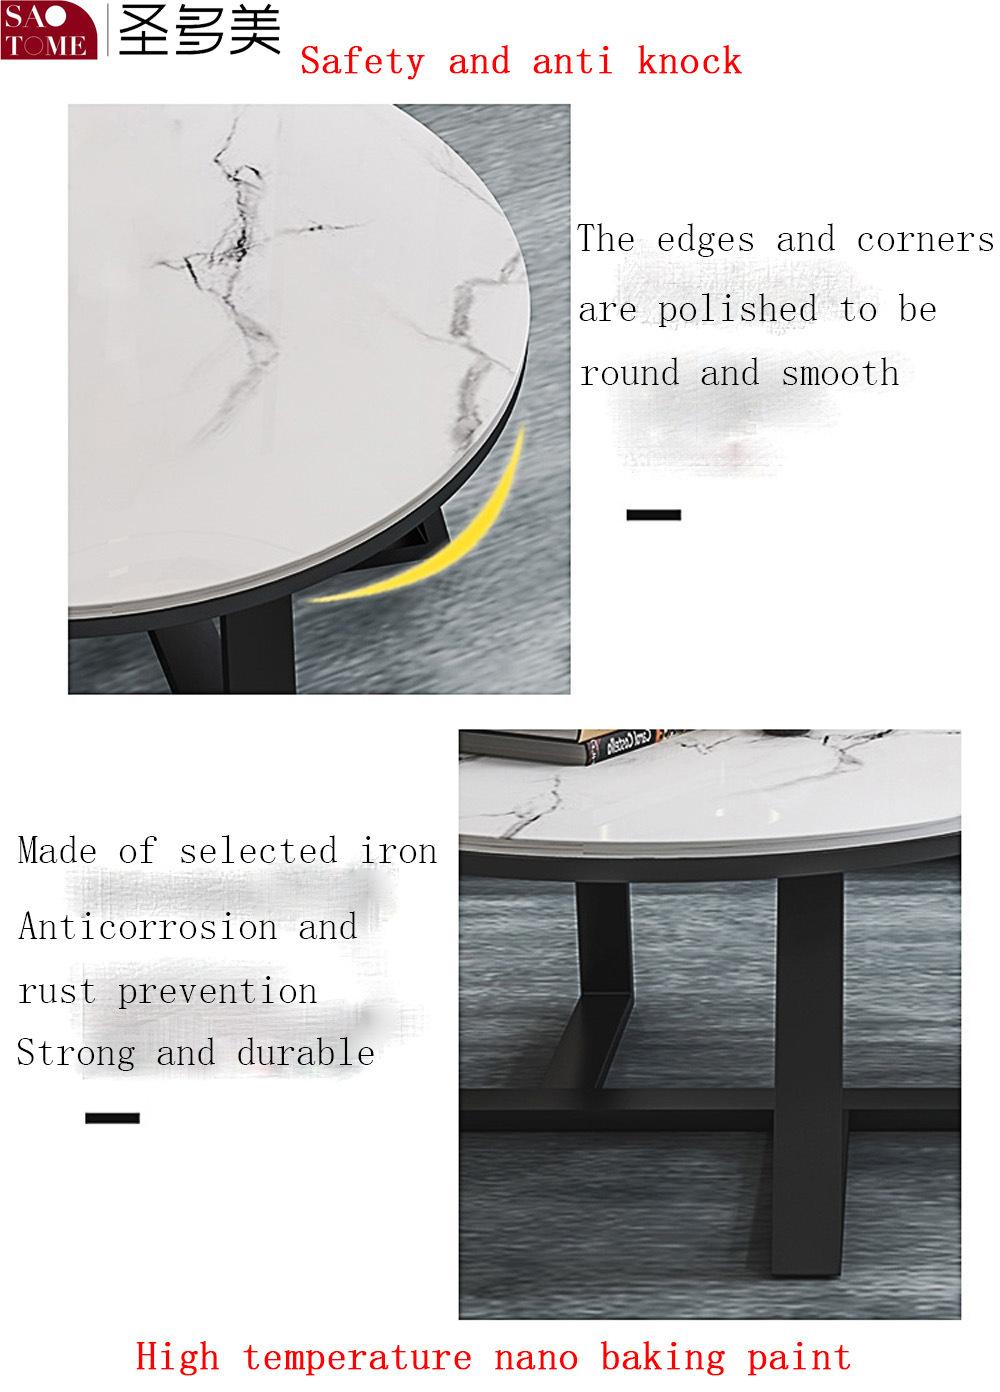 Modern Popular Living Room Furniture Two Specifications Matte Rock Plate Round Tea Table